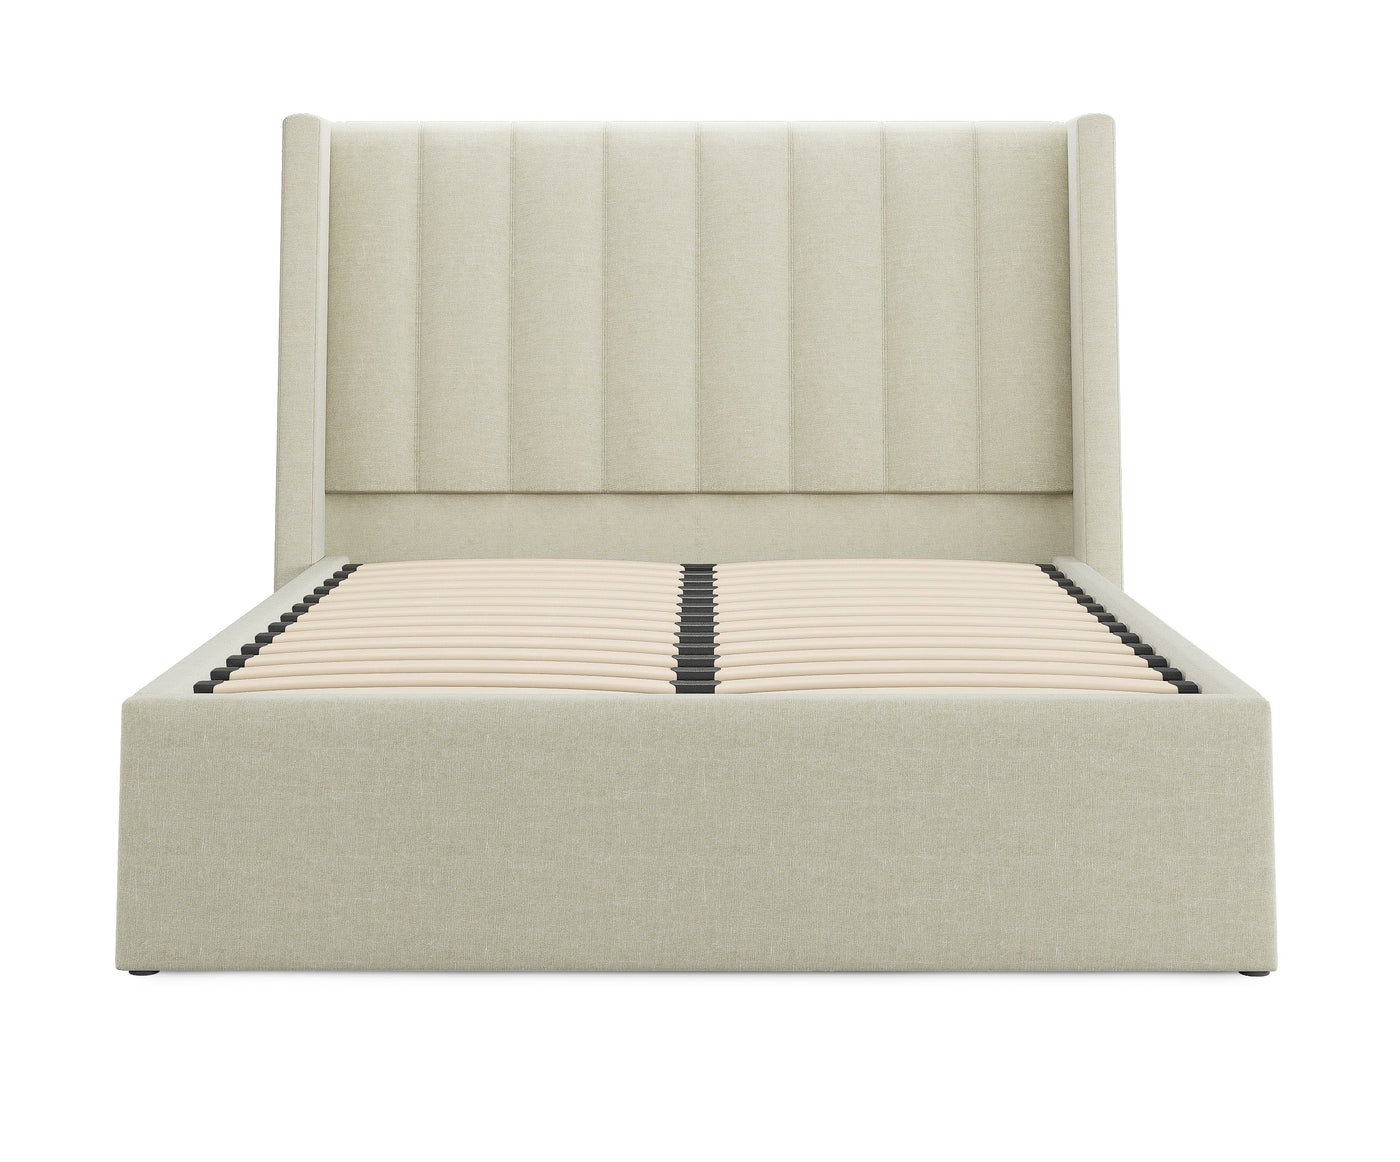 Bentleigh Gas Lift Storage Bed Frame (Stone Beige Linen Fabric) and Royal Memory Foam Plush Mattress Combo Deal (7841958854910)